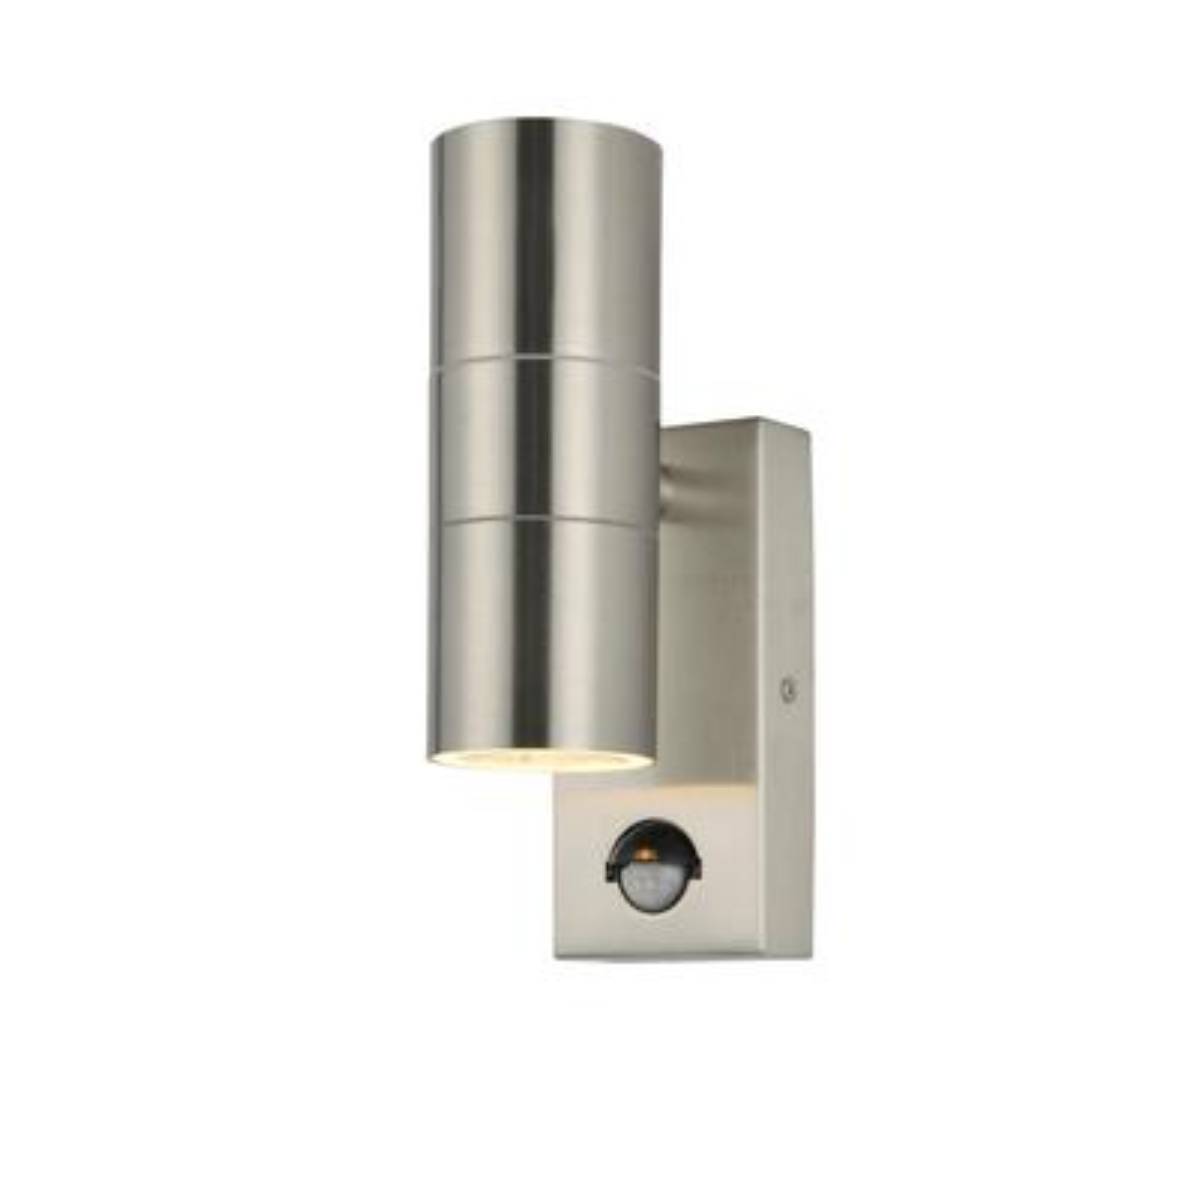 Forum Zinc ZN-29179-SST Leto Twin Up/Down Wall Light - Stainless Steel (11994)